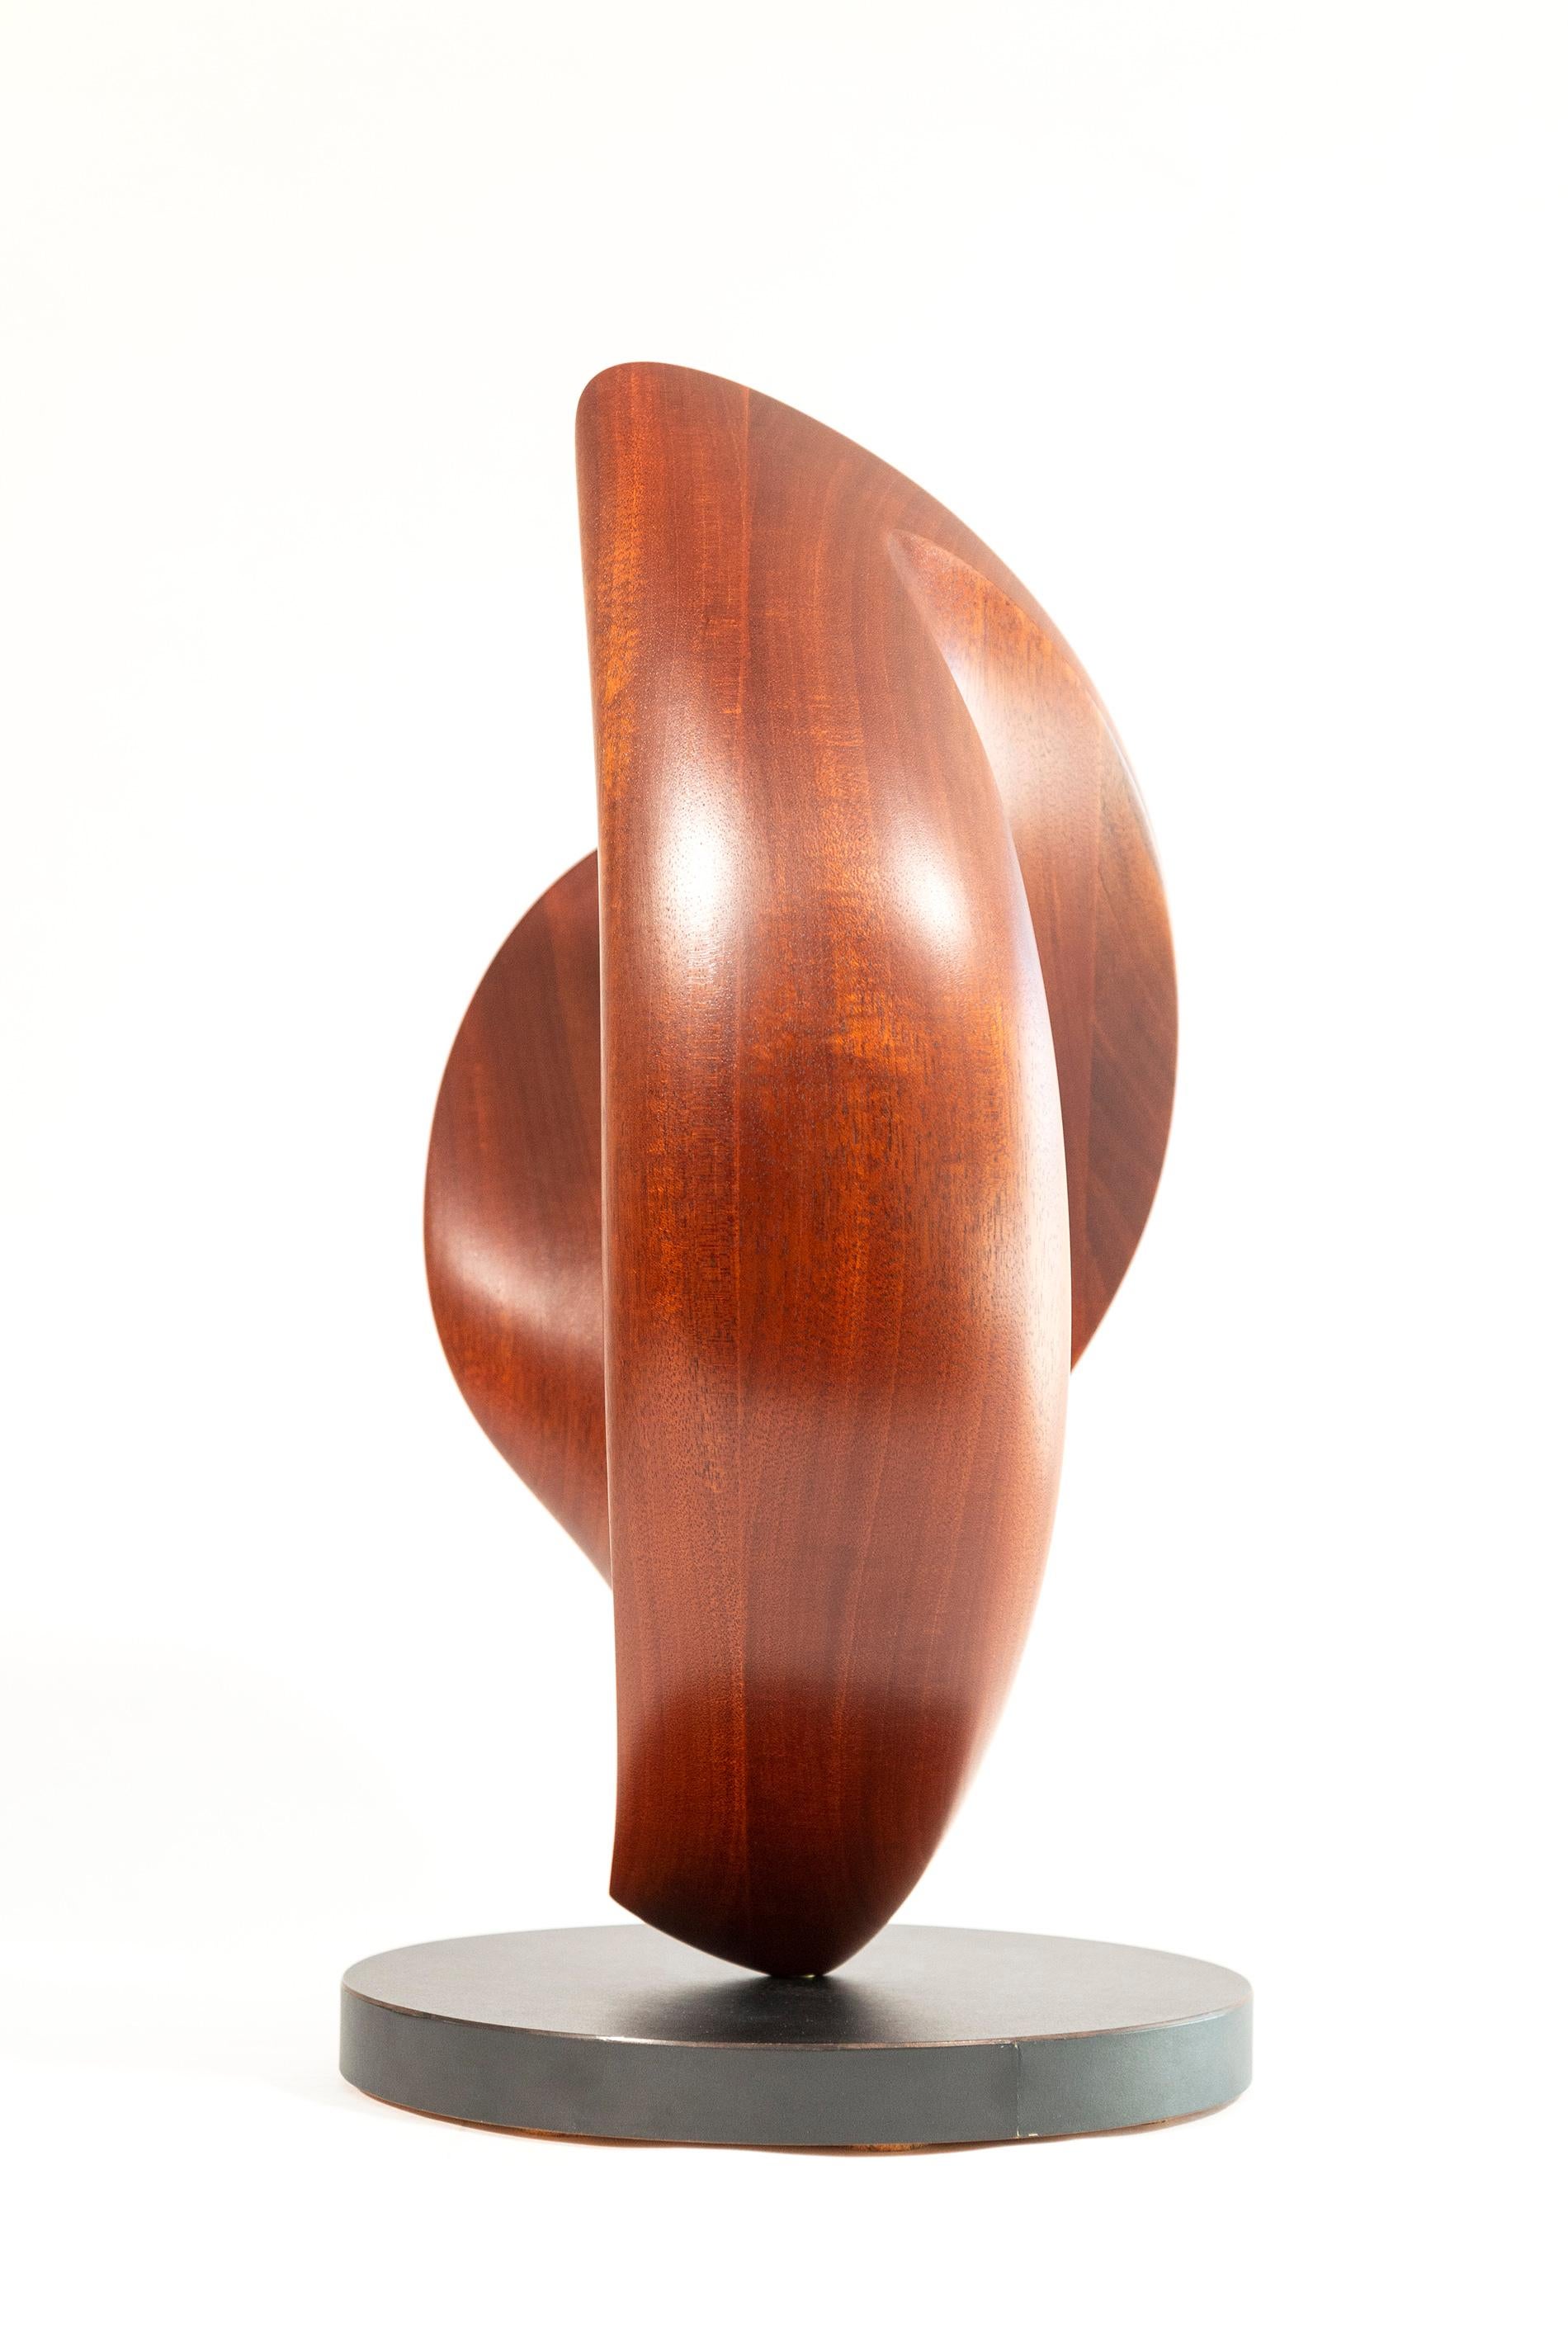 Senza Misura - smooth, polished, abstract, contemporary, mahogany sculpture For Sale 4